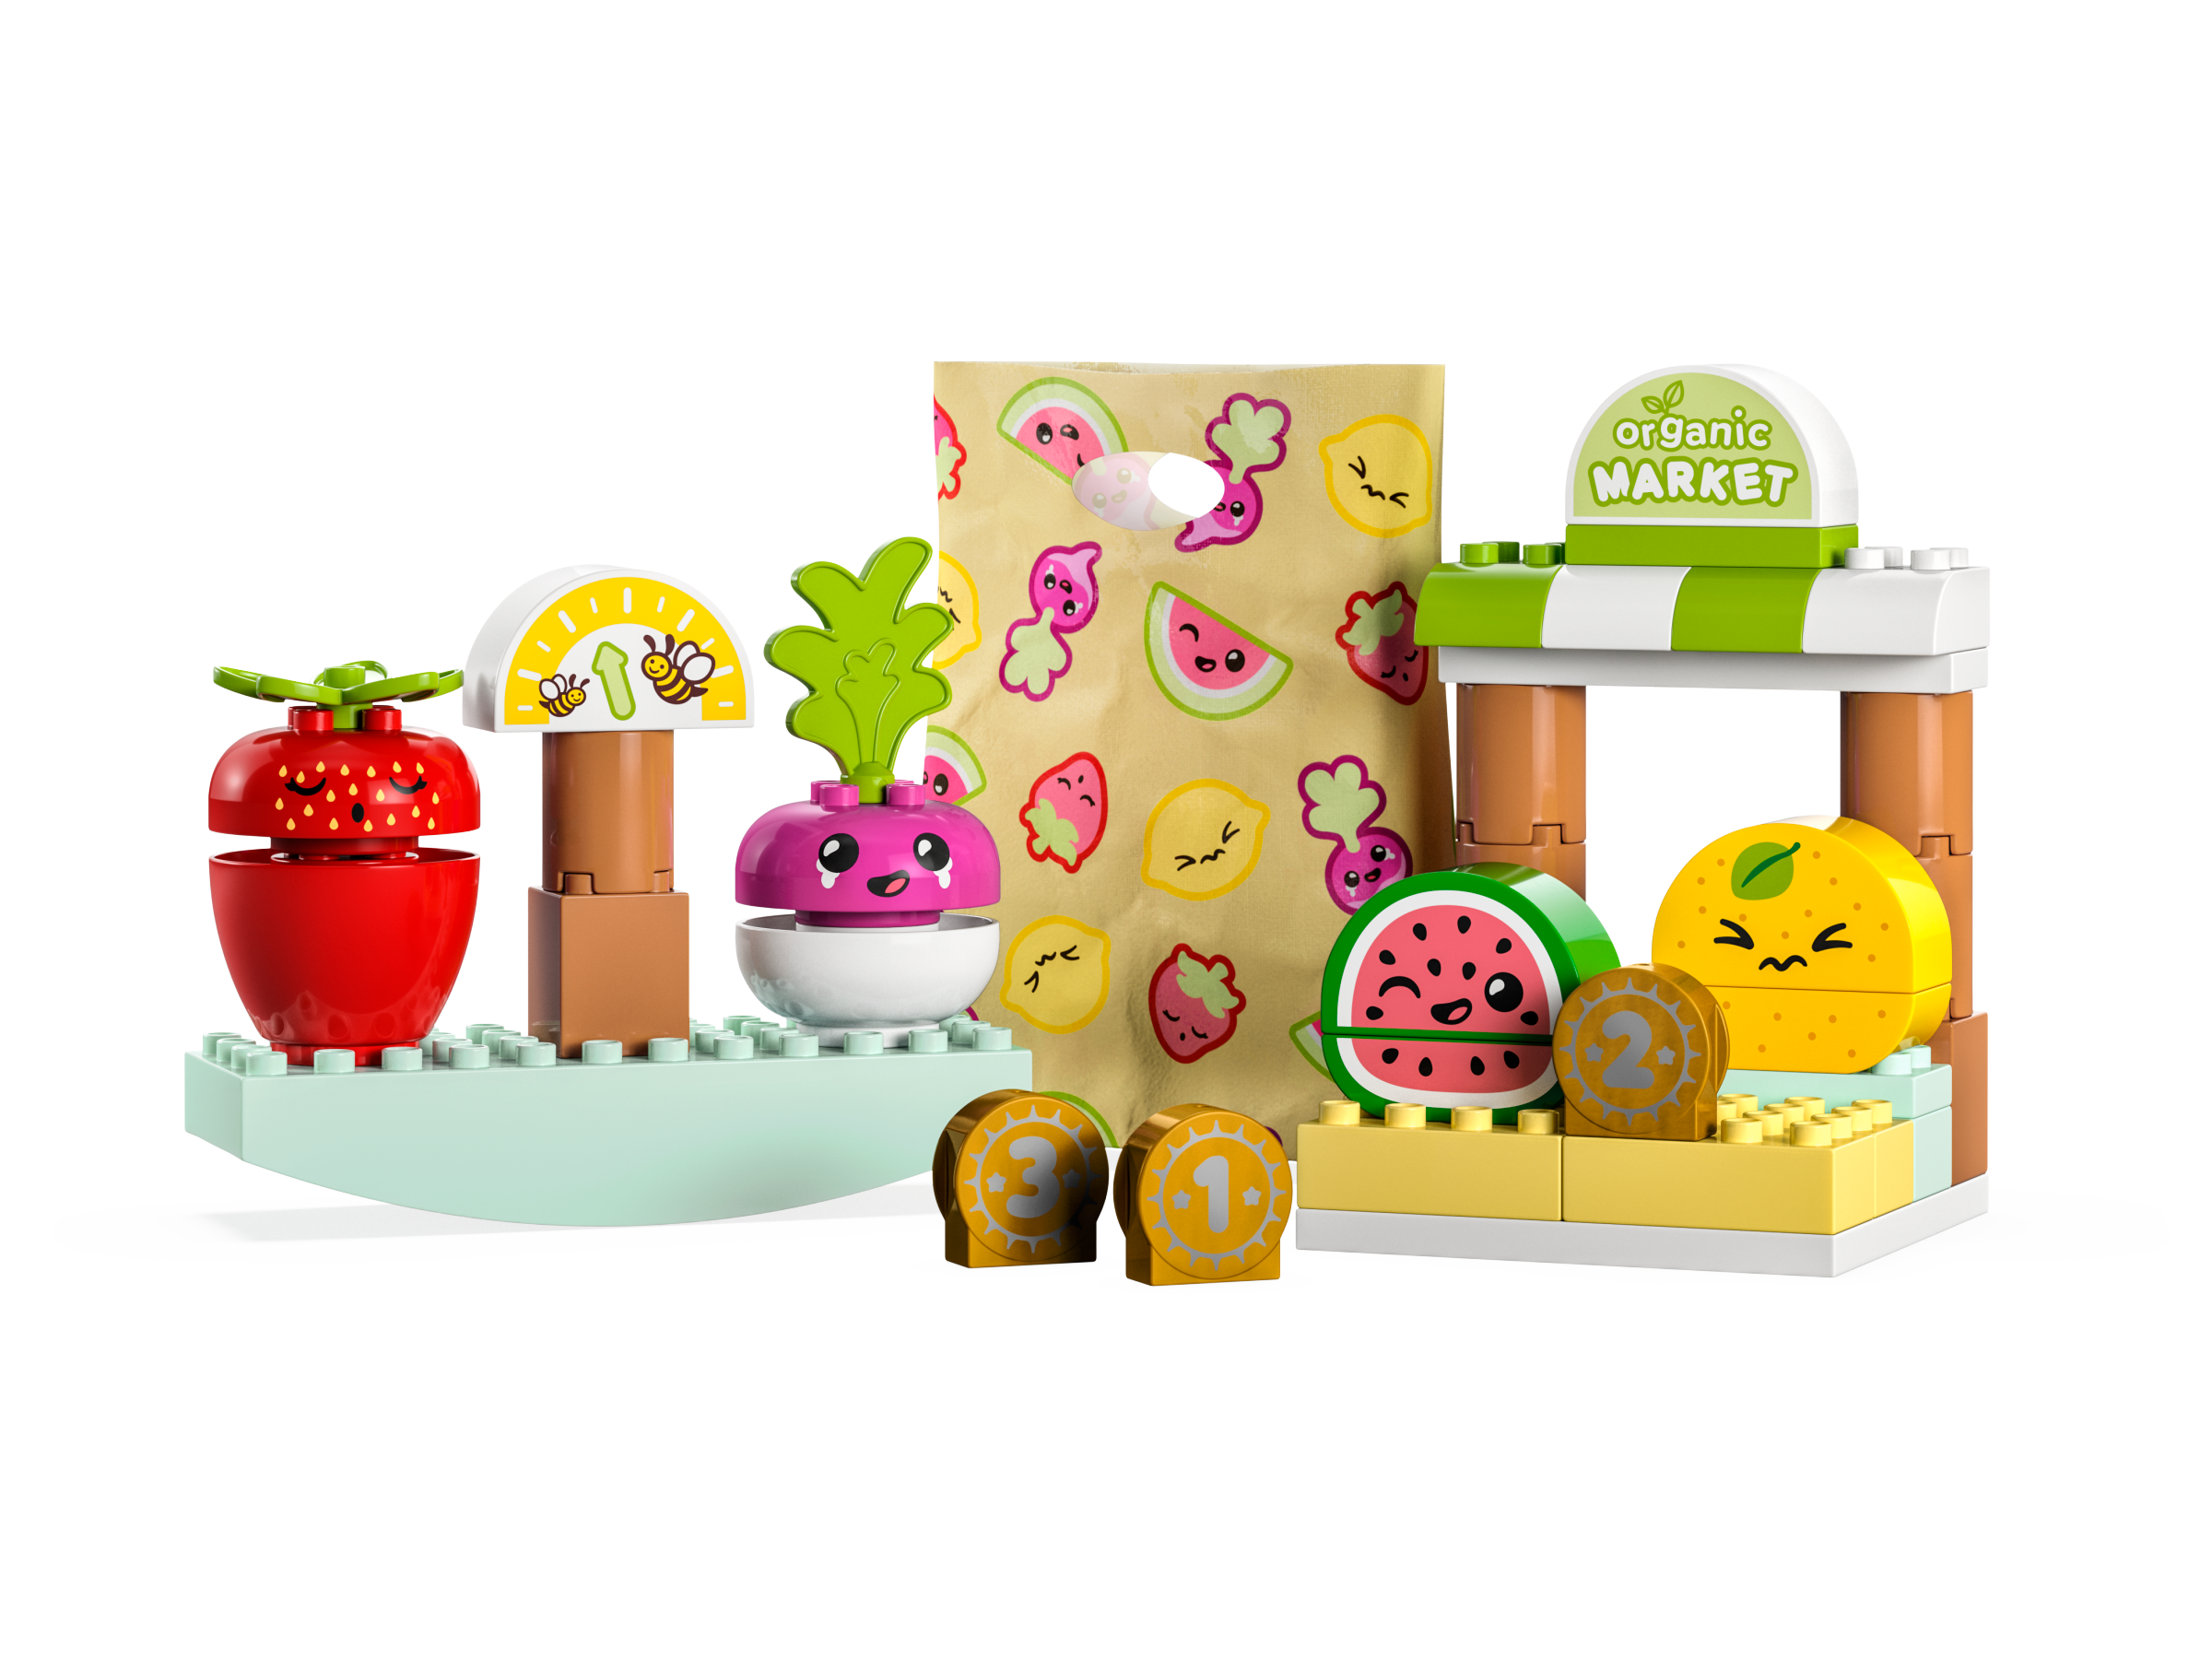 Organic Market 10983 | DUPLO® | Buy online at the Official LEGO® Shop US